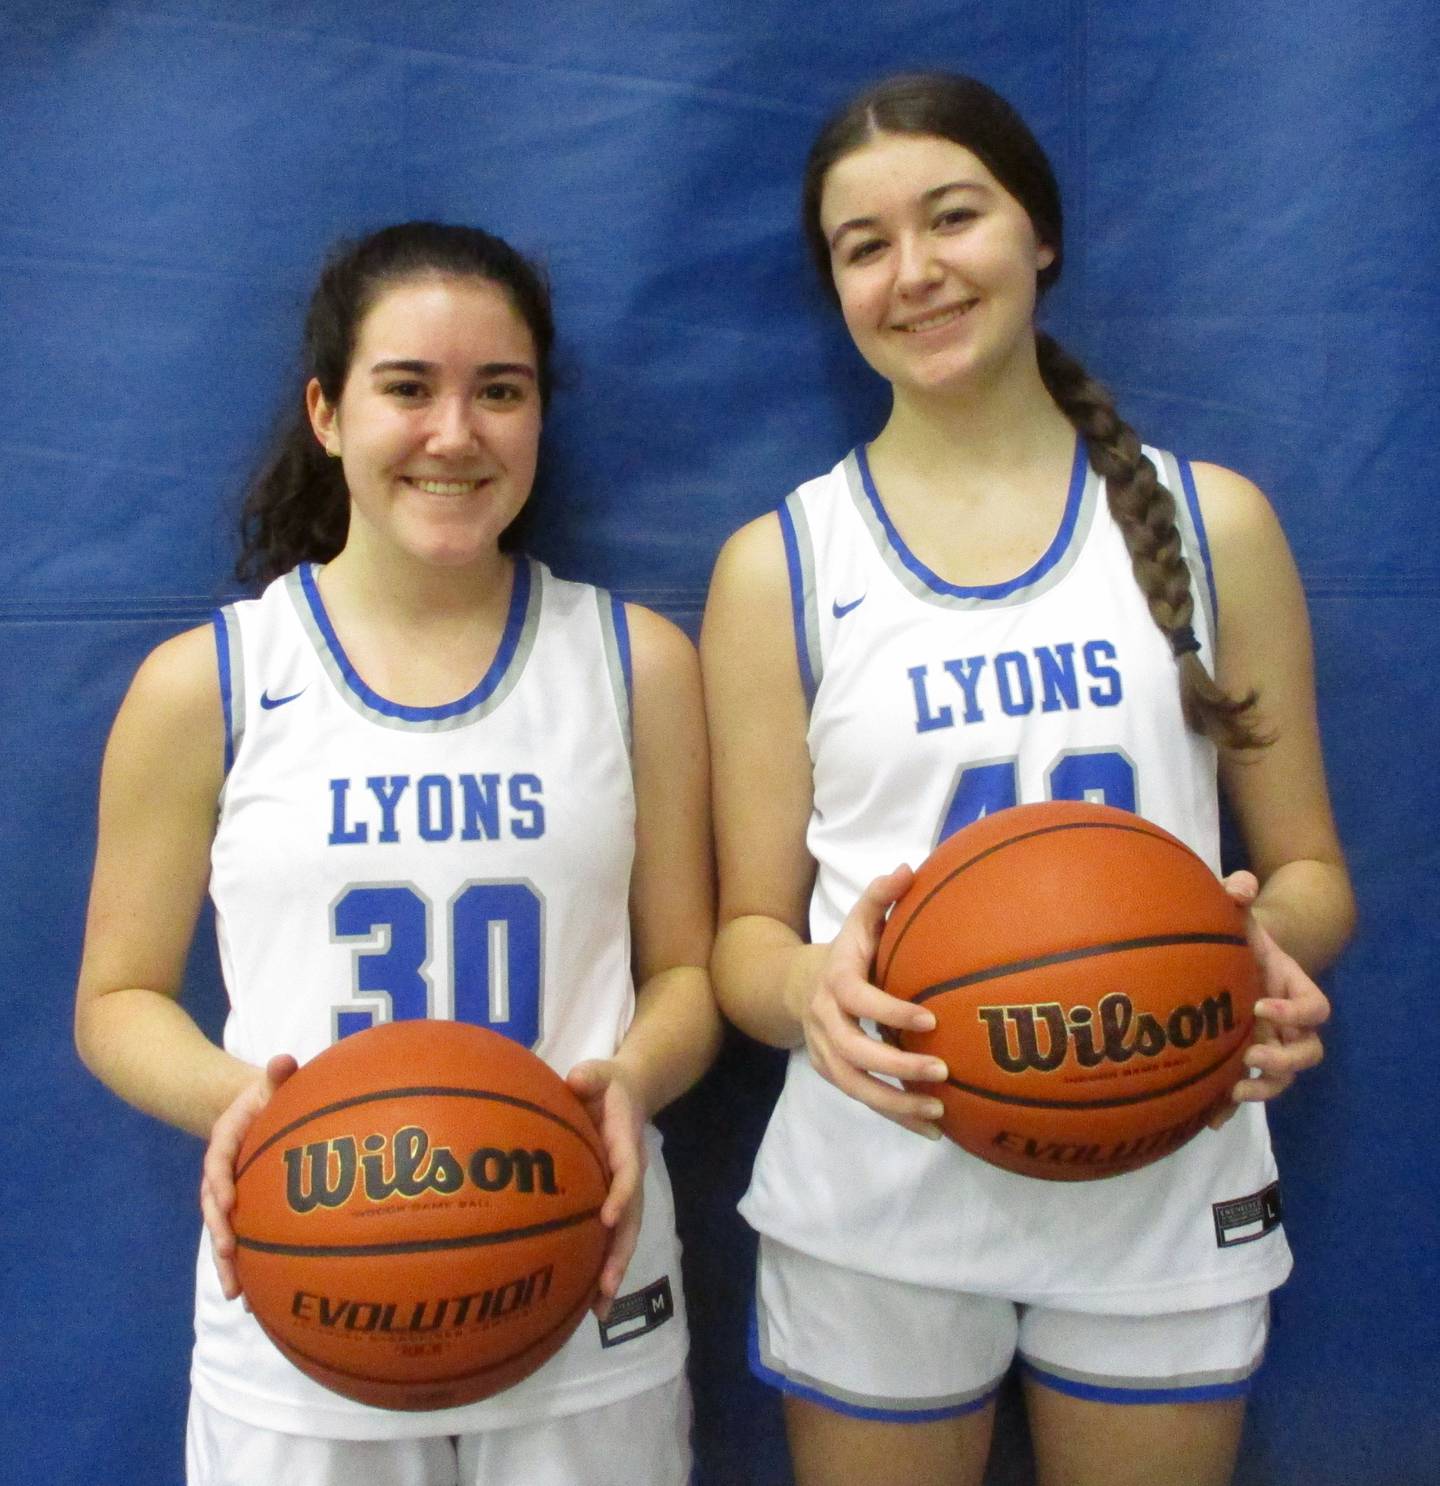 Sisters Erin (left) and Emma (right) O'Brien are teammates together this season for the Lyons Township basketball team.